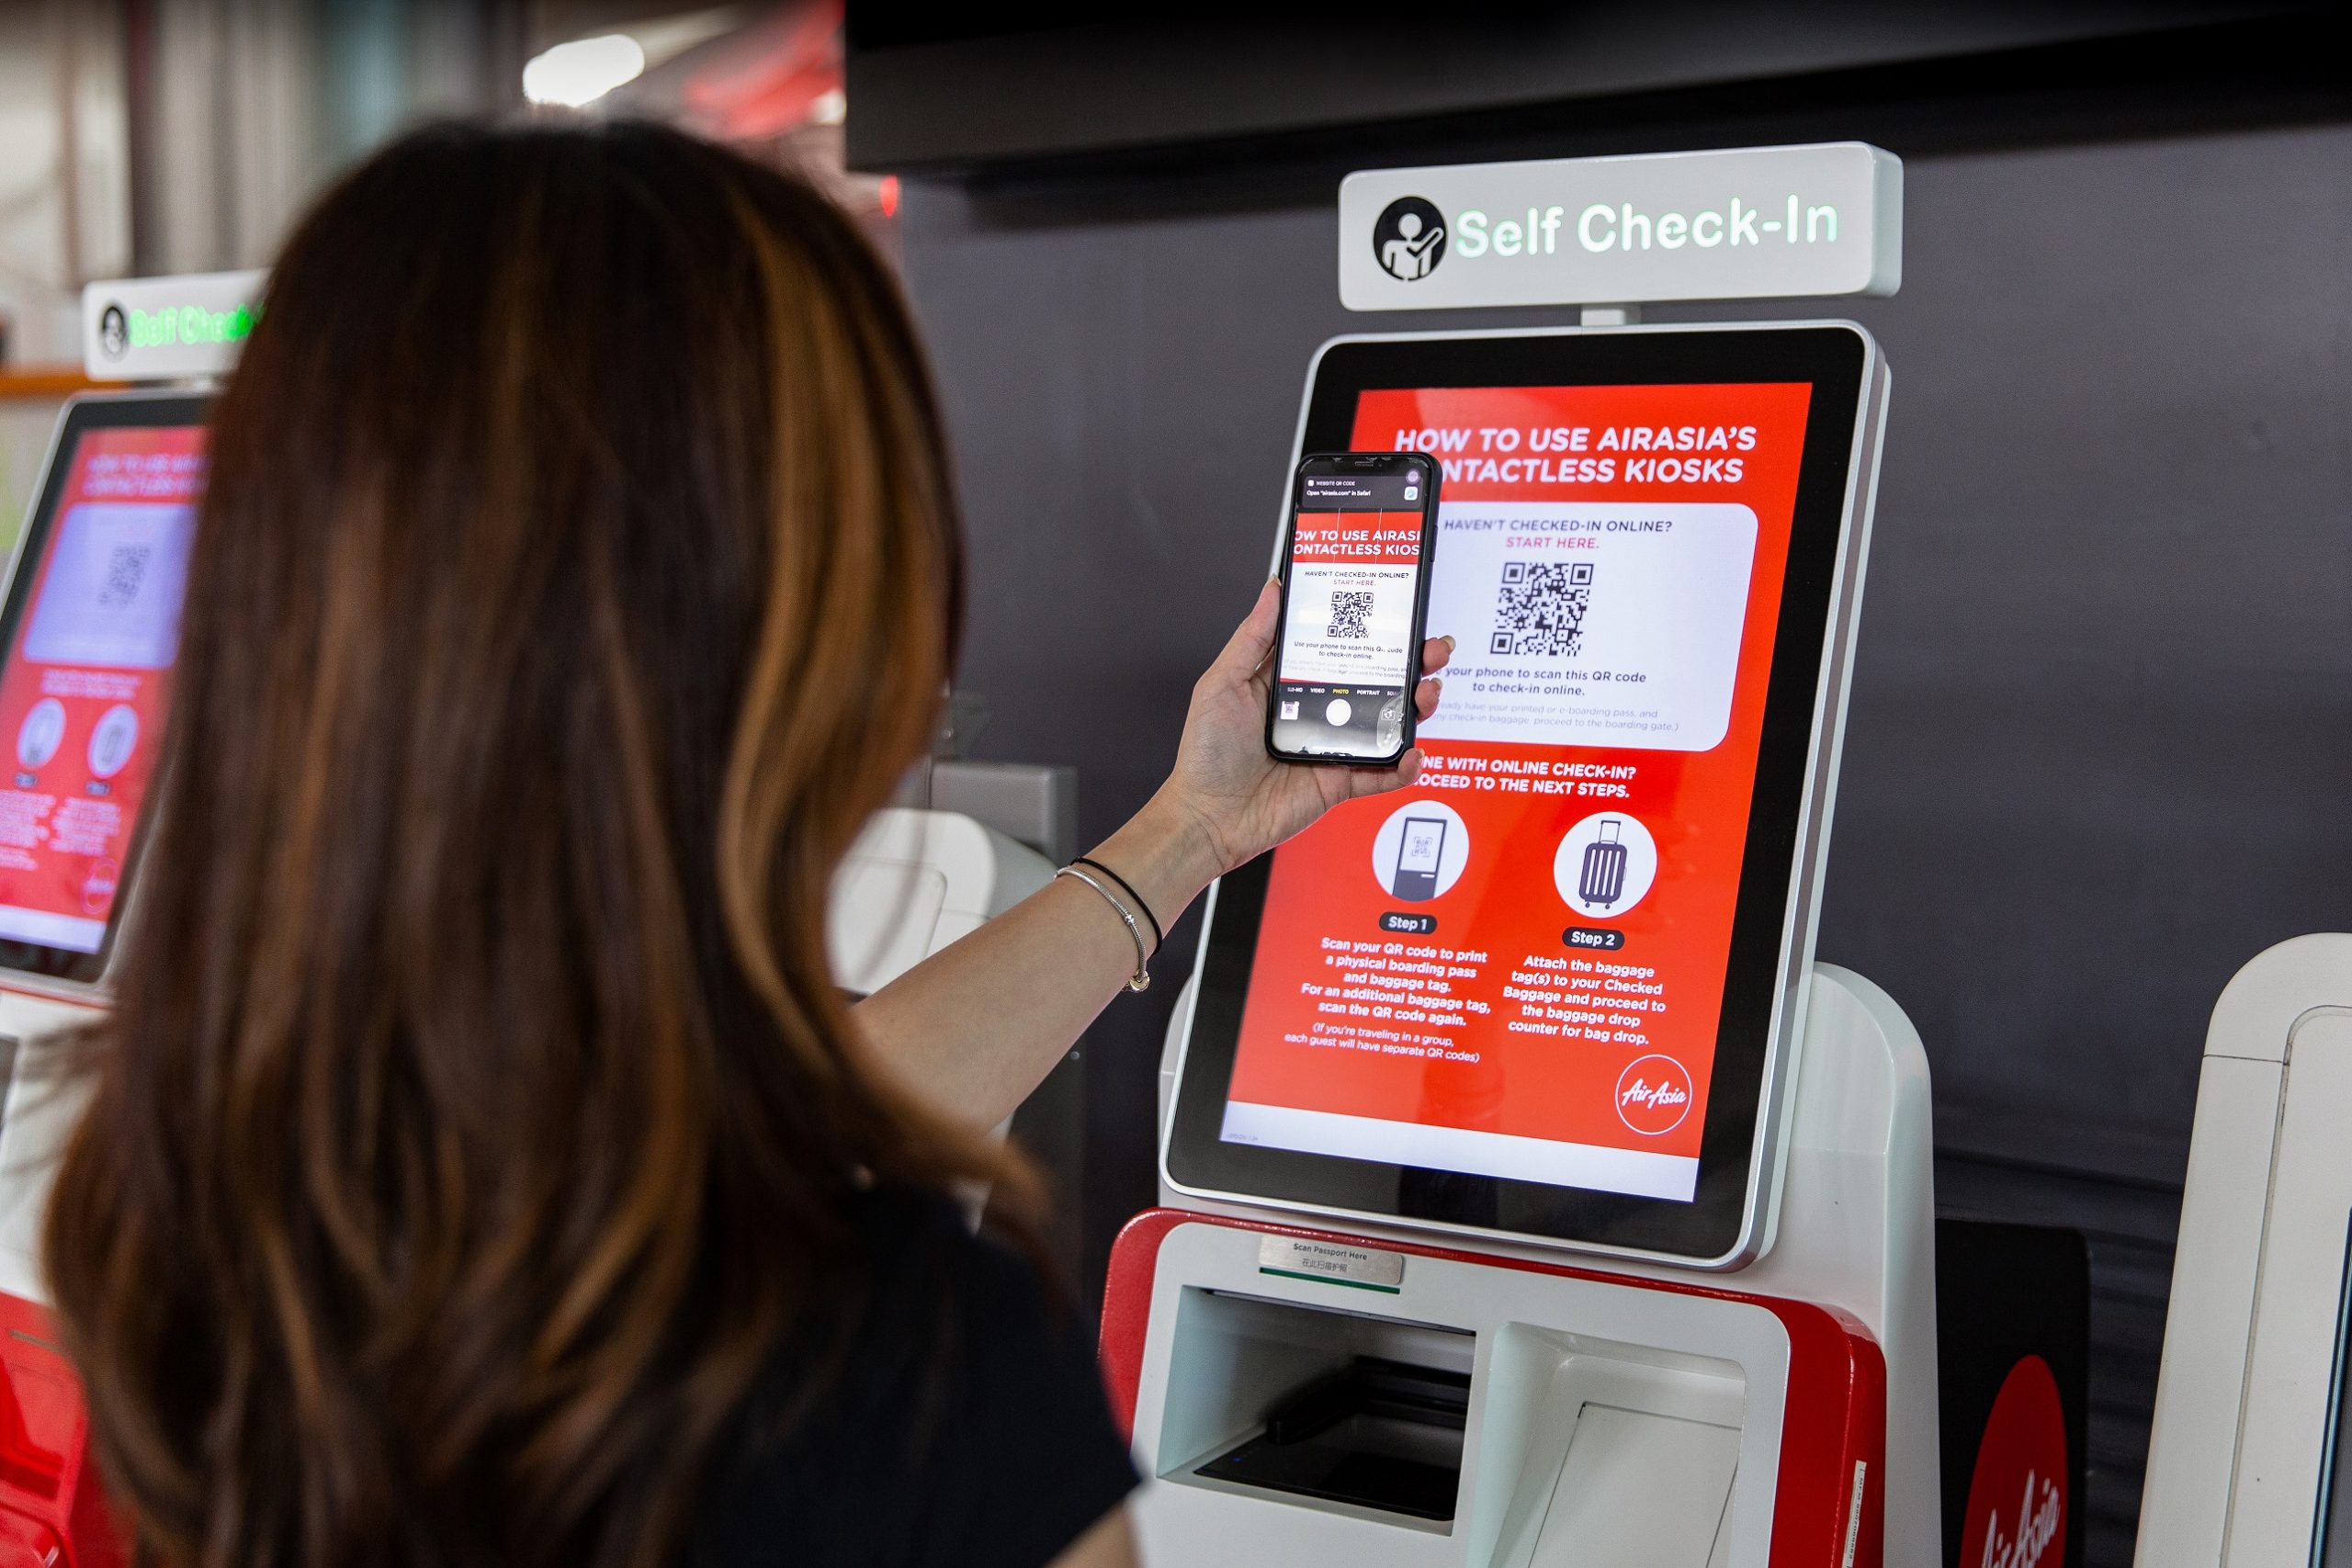 AirAsia enhances digital self check-in as part of safety ...